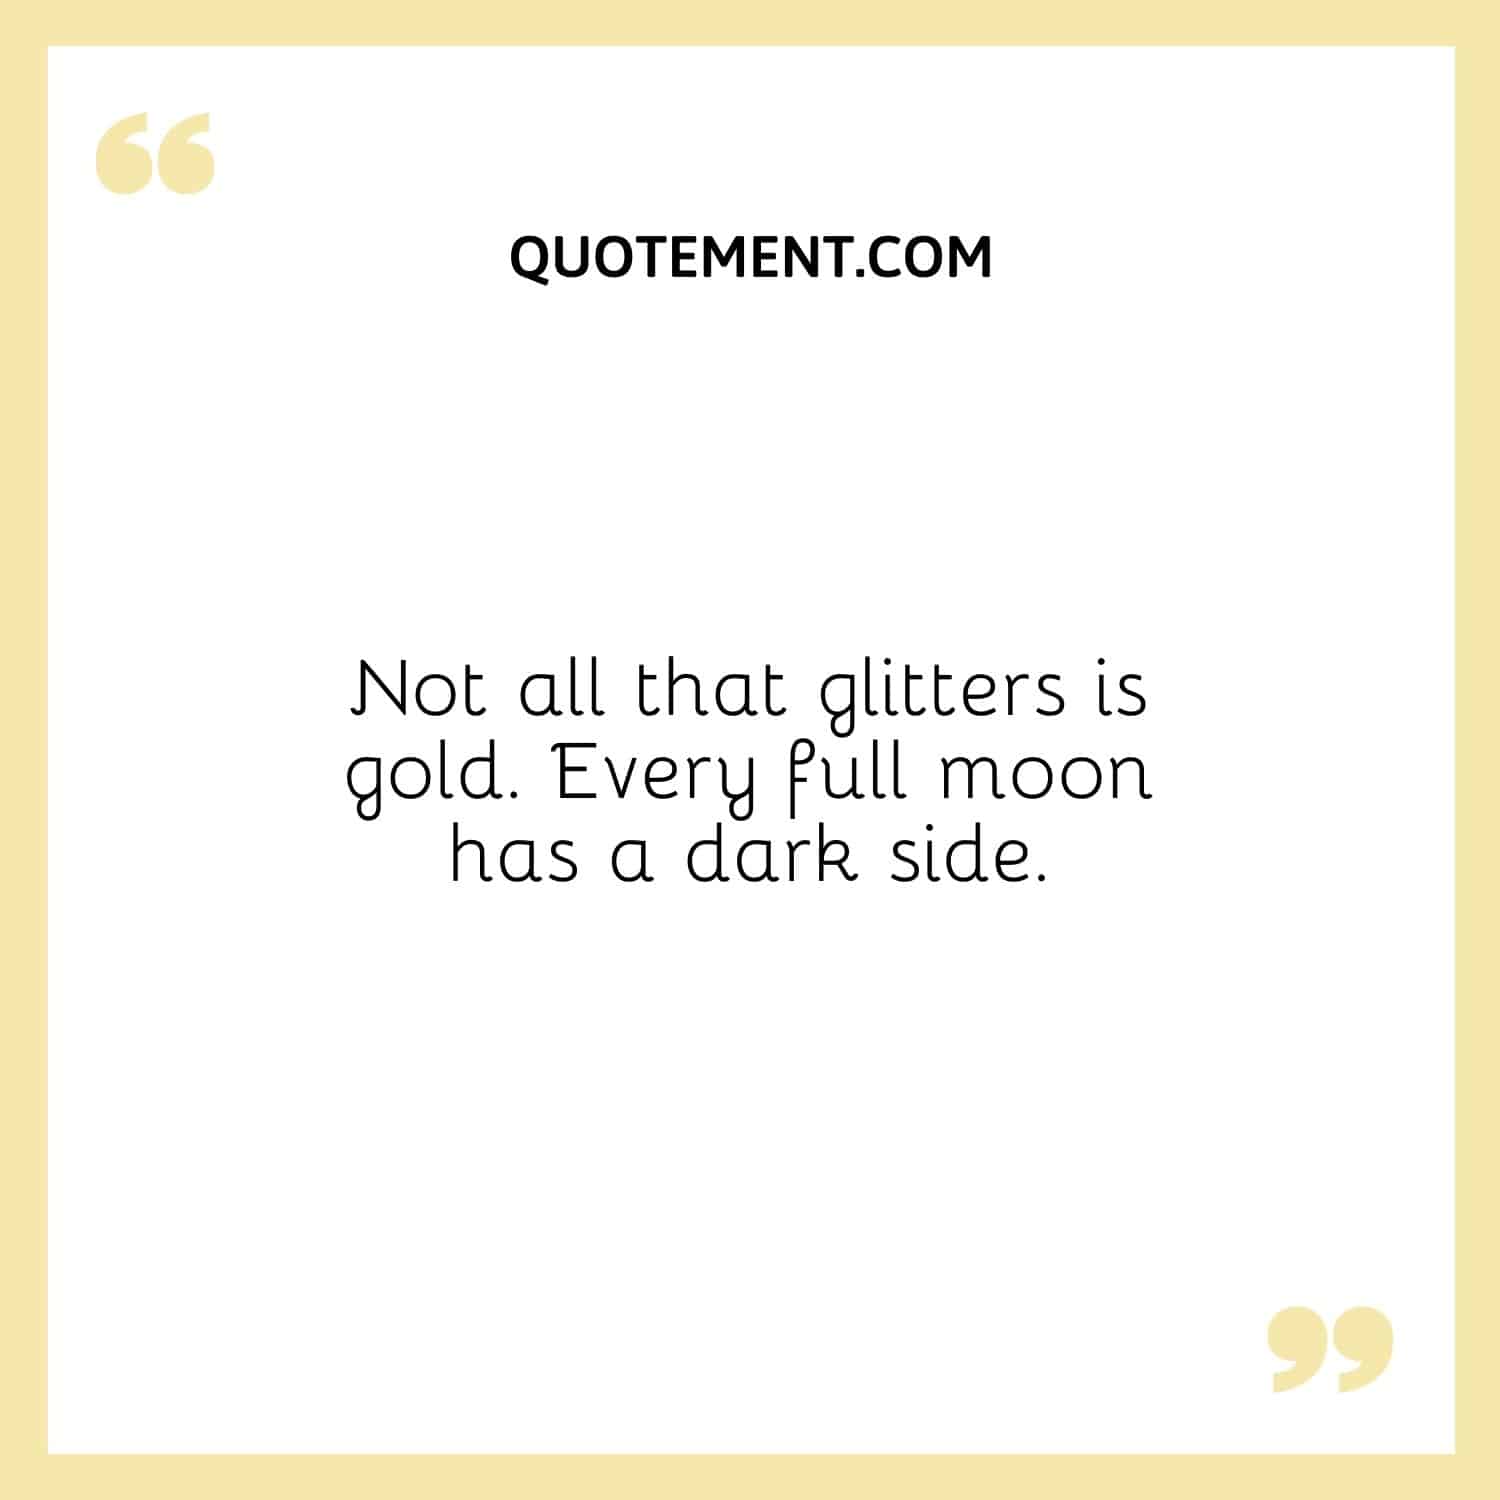 Not all that glitters is gold. Every full moon has a dark side.